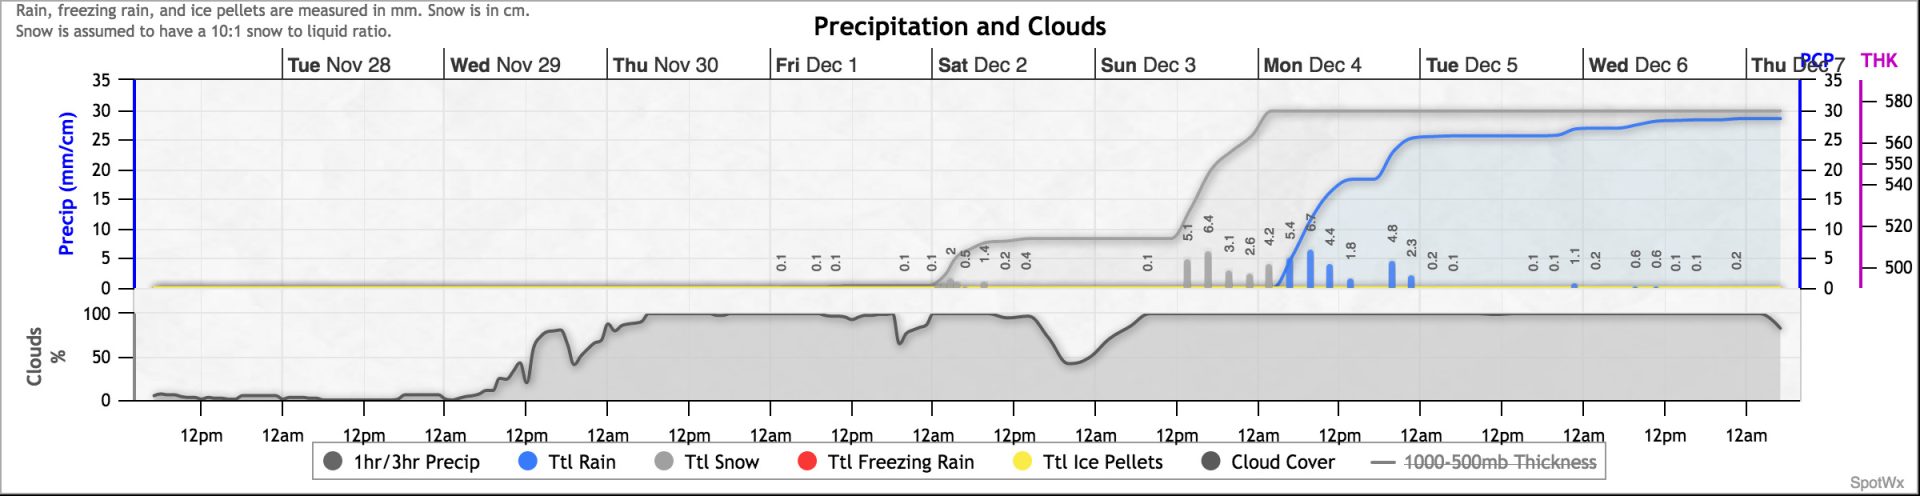 precipitation data from GFS for Bogus Basin showing arrival of large snowstorm later in the week.